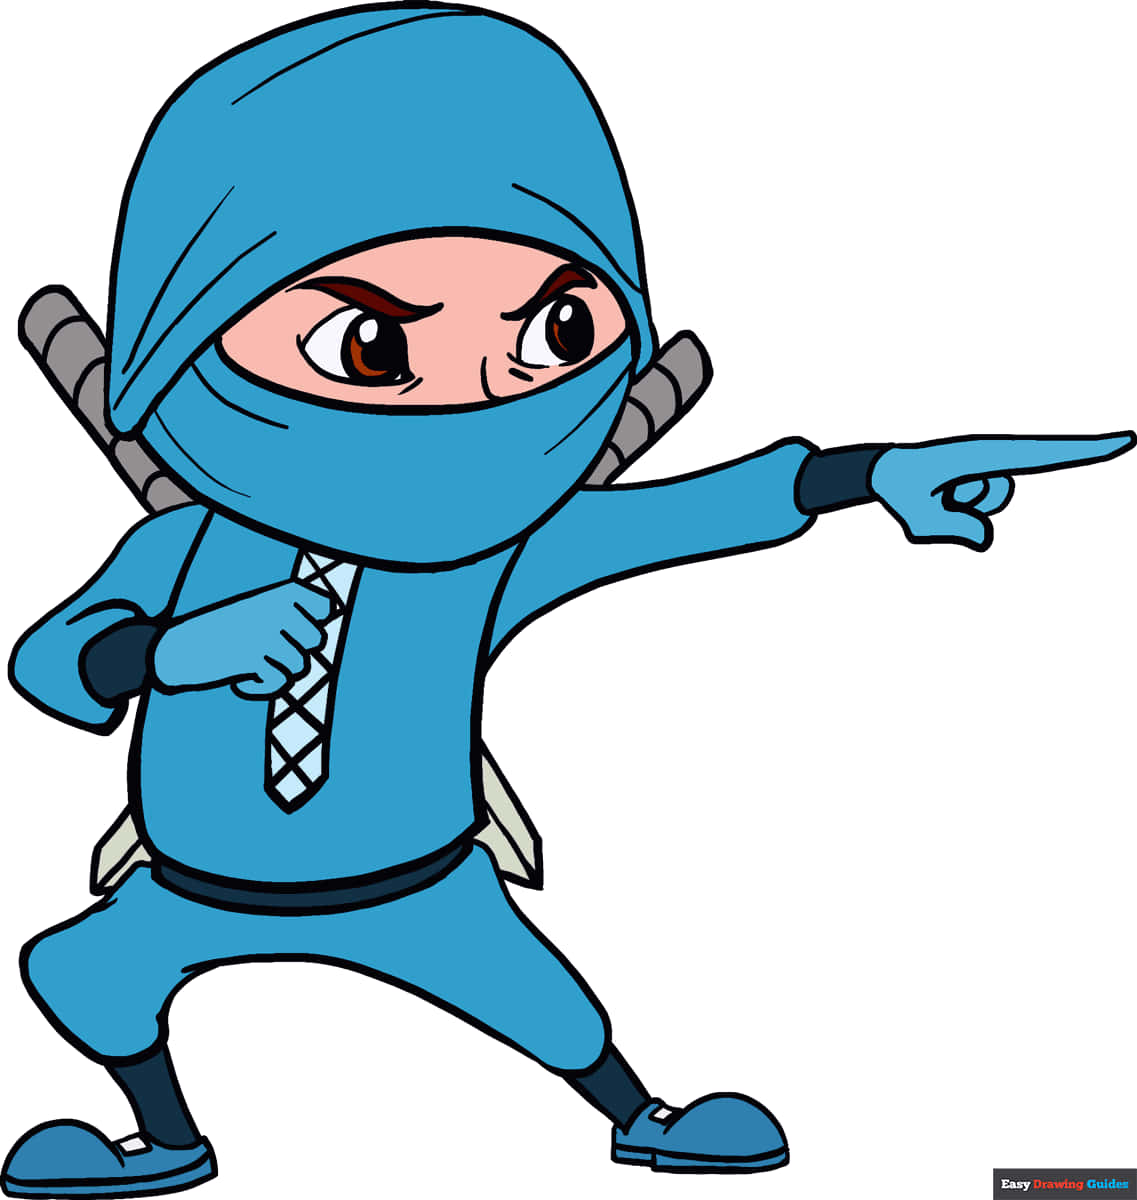 How to Draw a Ninja: 2 Easy Tutorials for Beginners